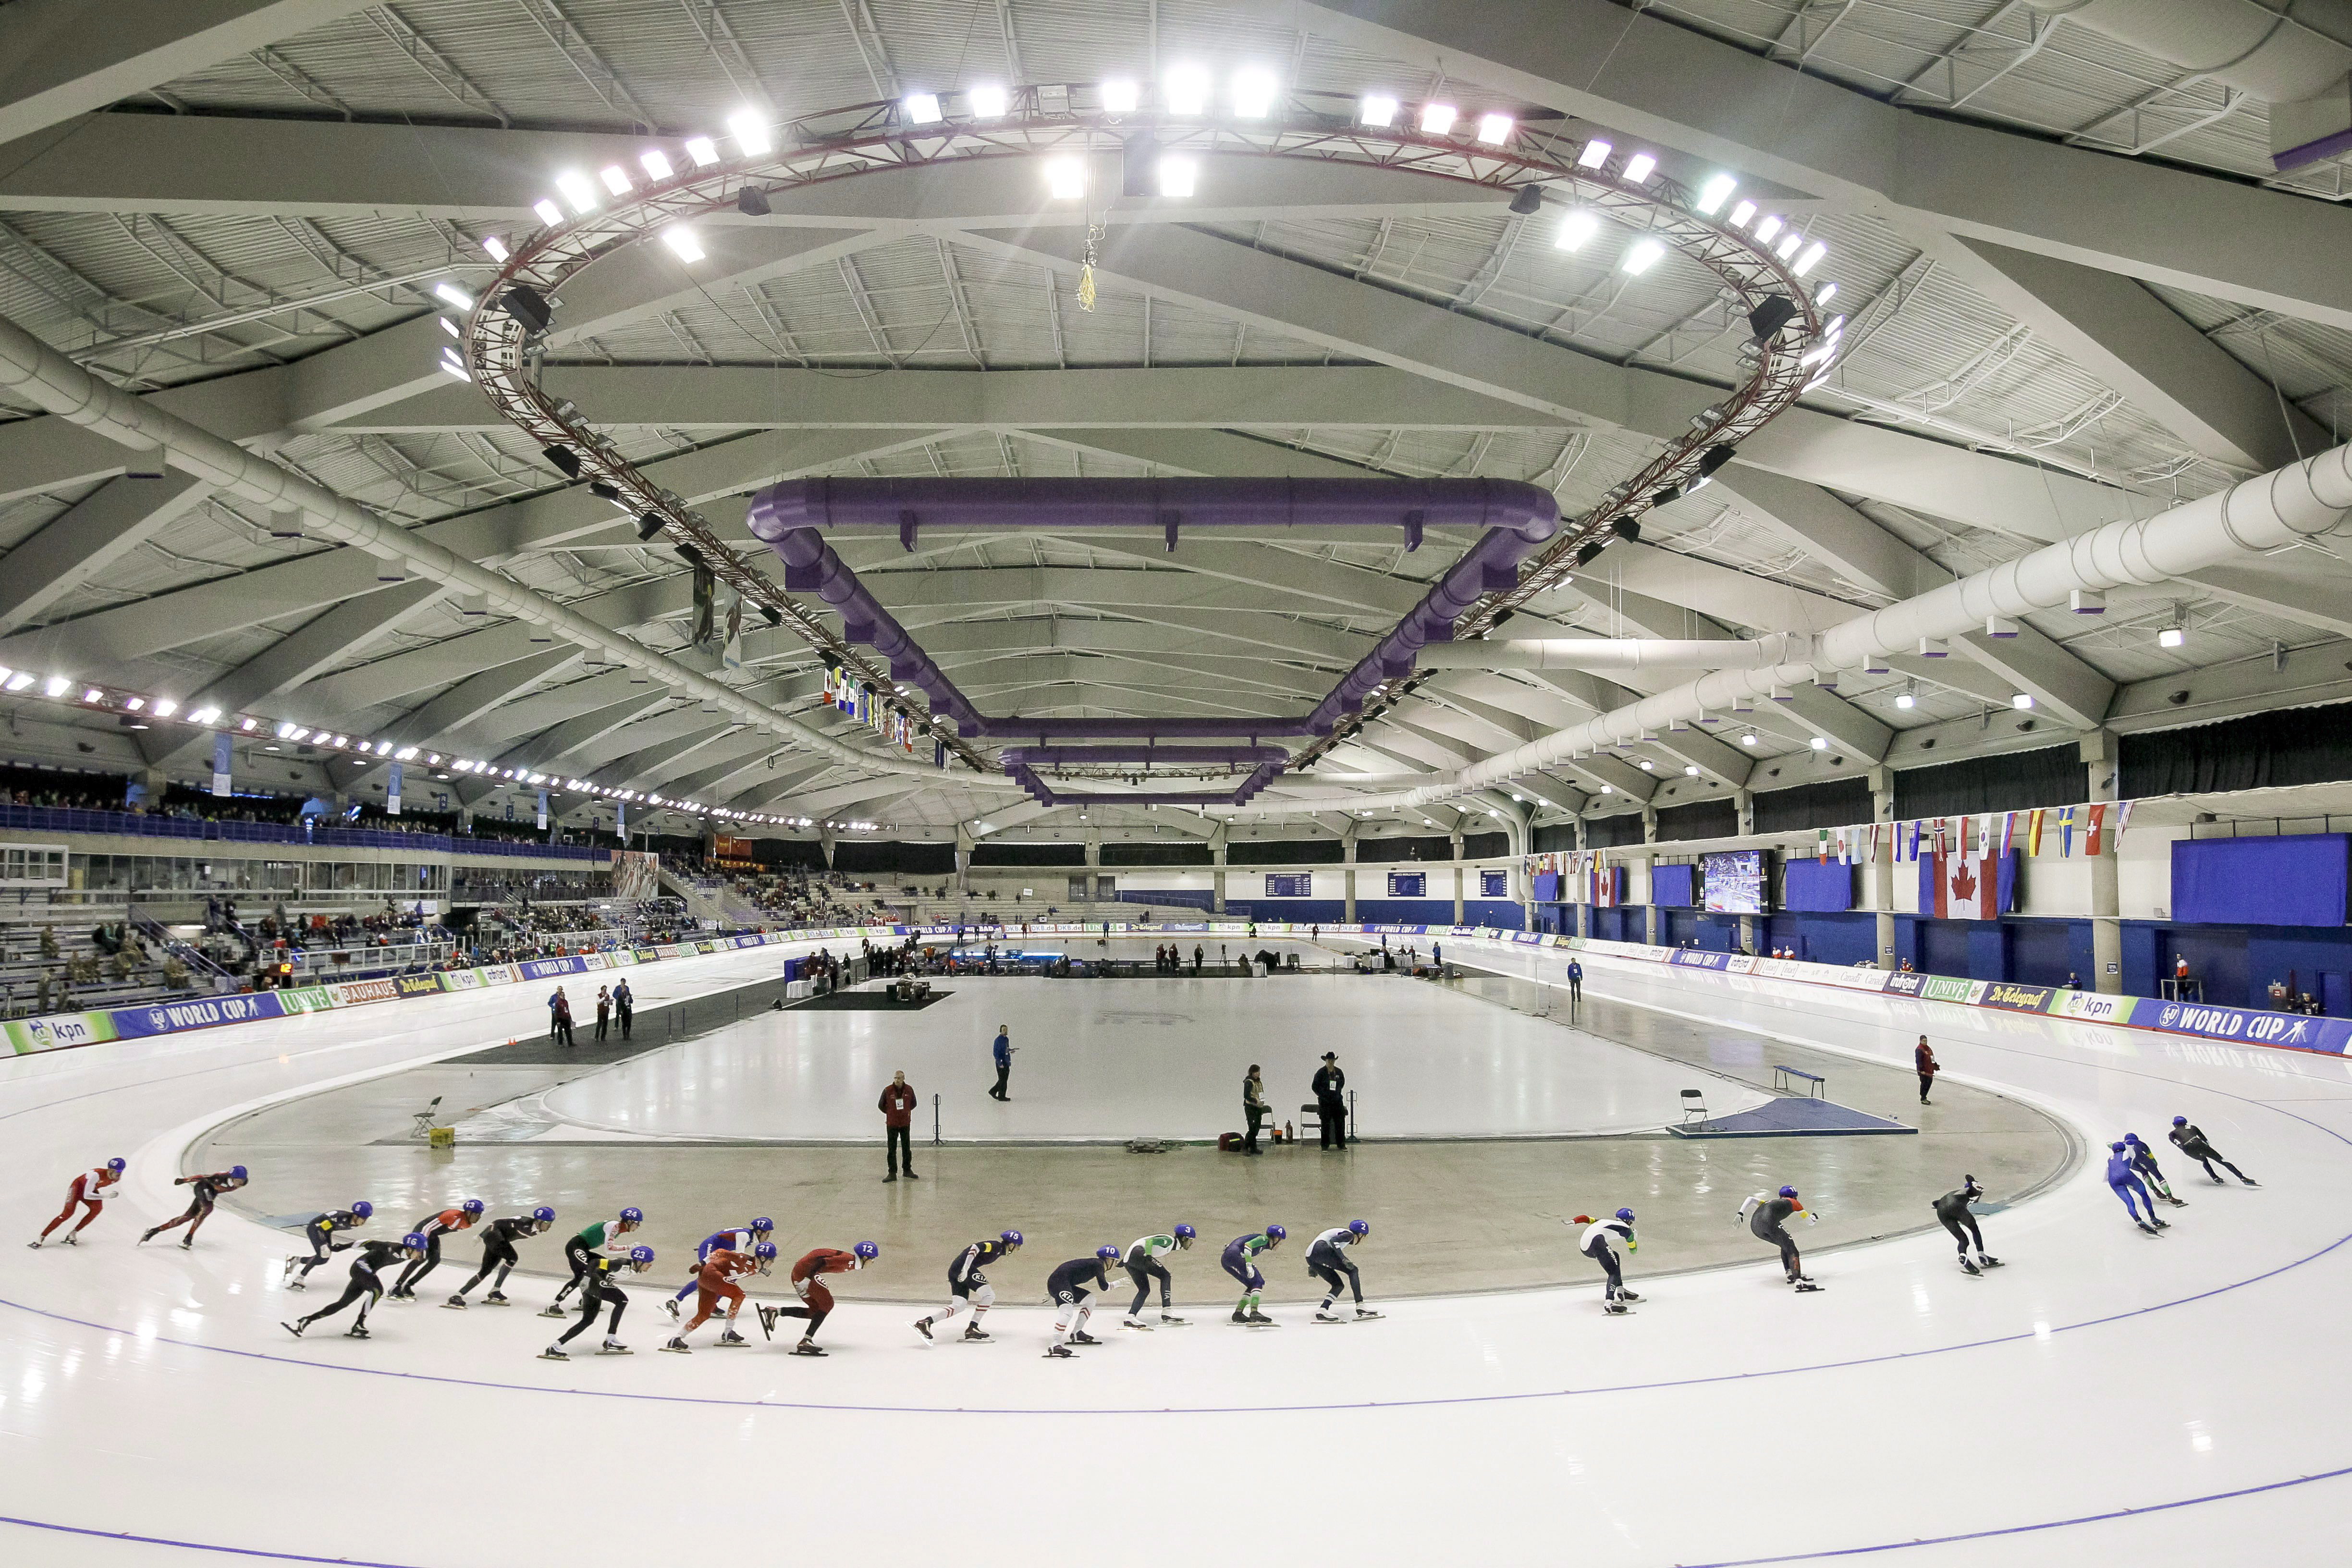 A crowd rounds a turn during the men's mass start competition at the ISU World Cup speed skating event in Calgary, Alta., Sunday, Nov. 15, 2015. THE CANADIAN PRESS/Lyle Aspinall